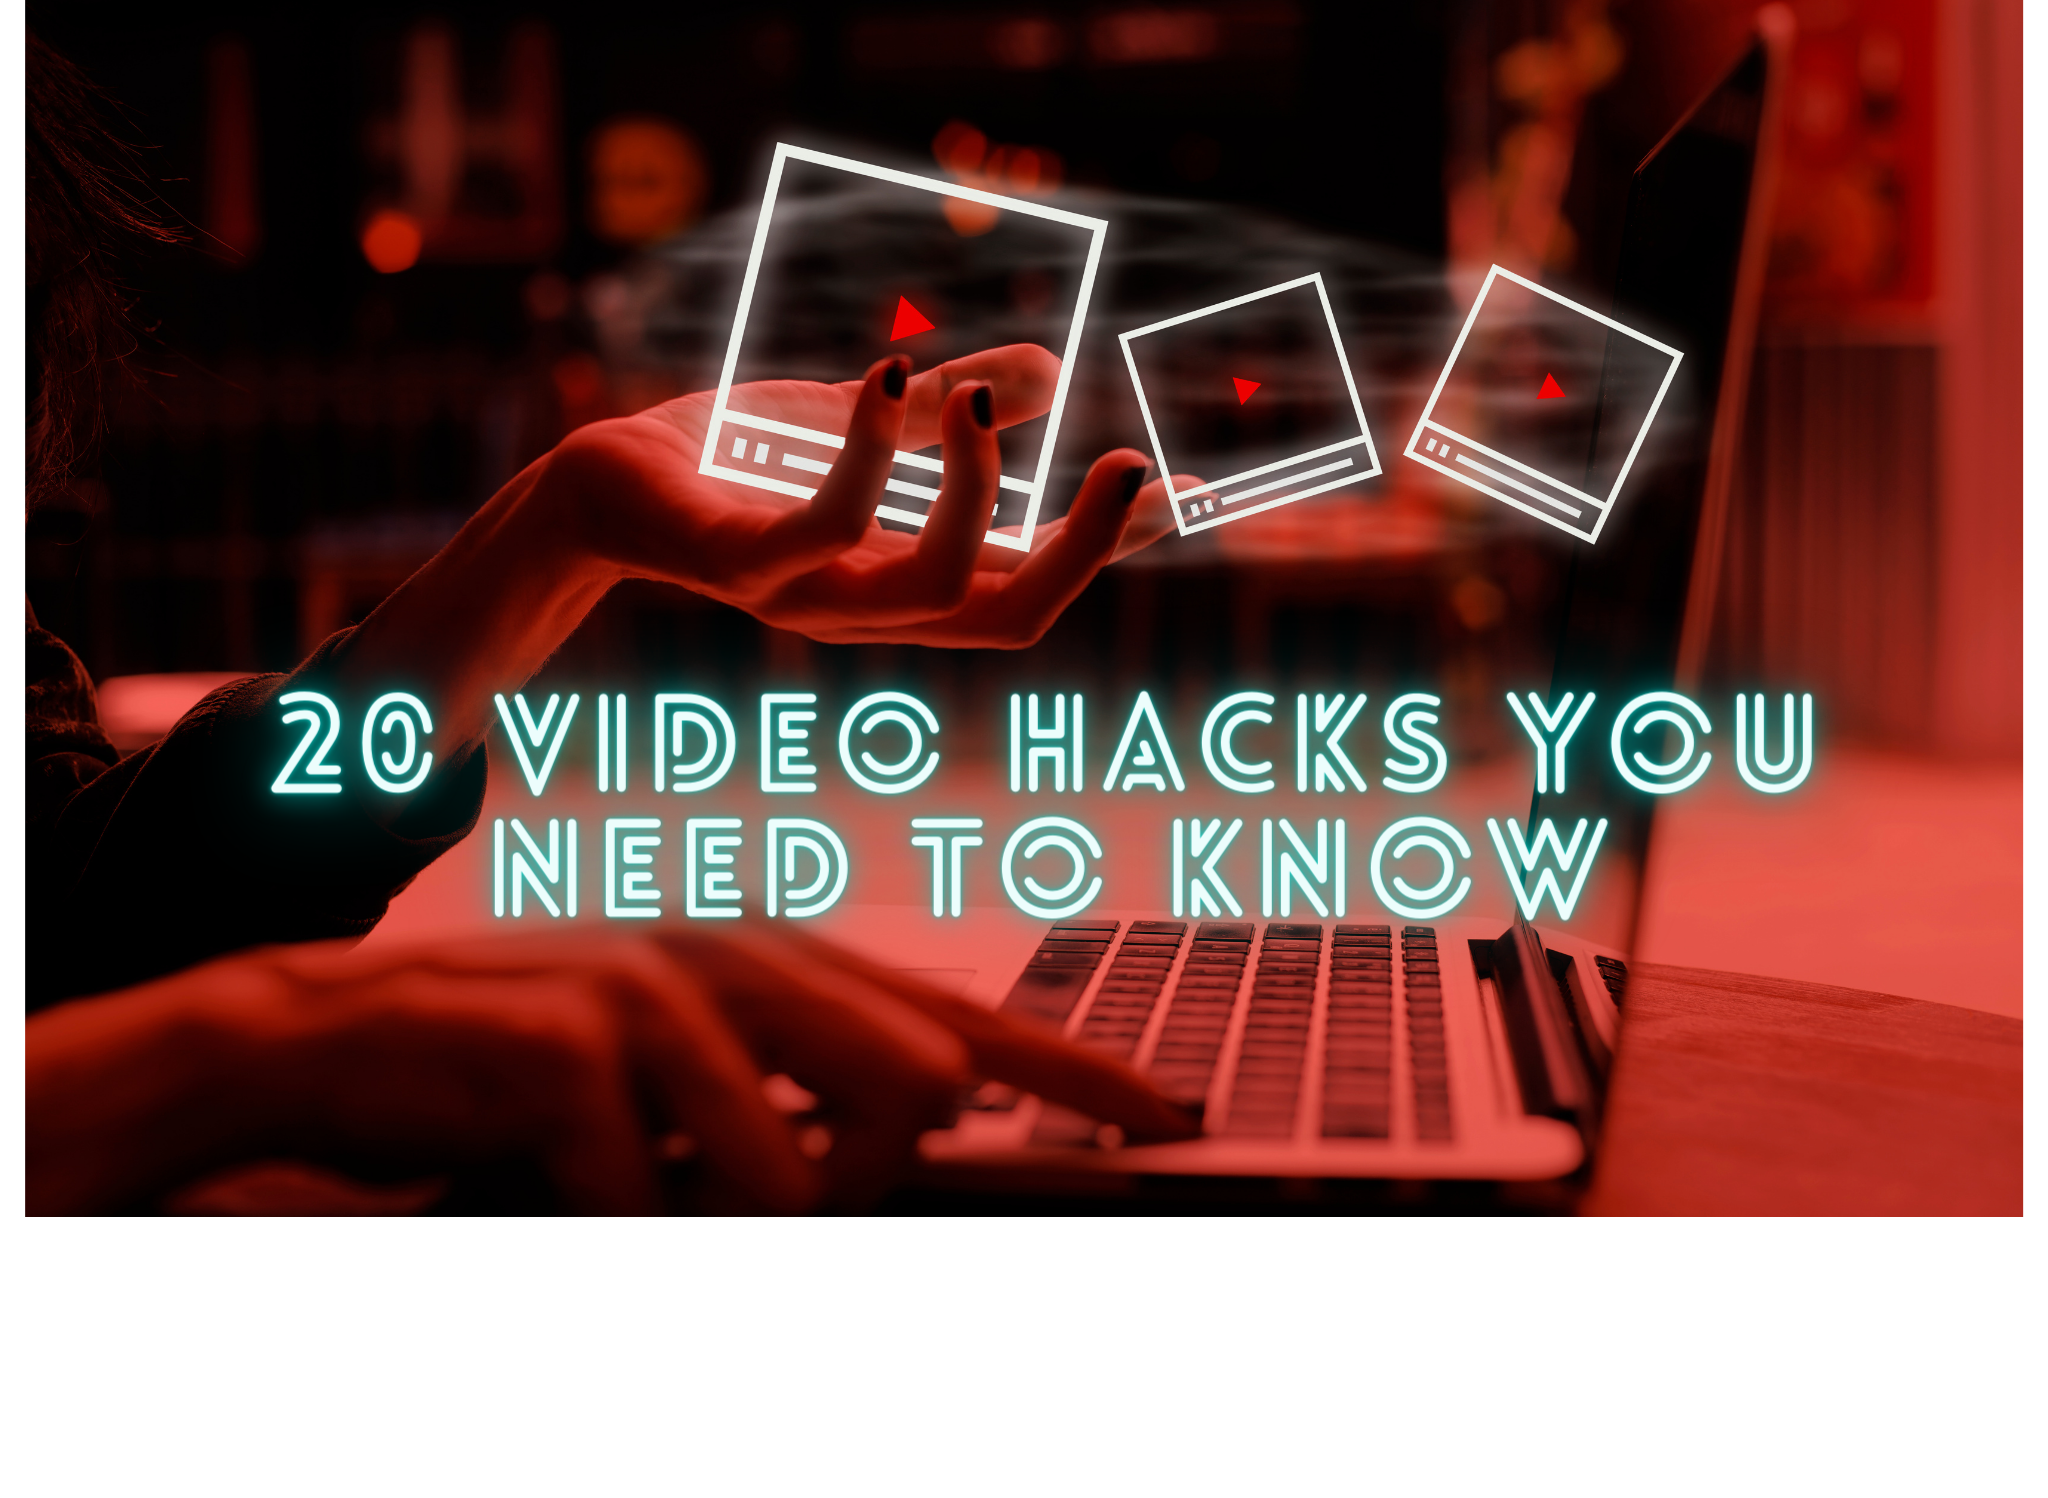 20 video hacks by Hippo Video to create great videos.